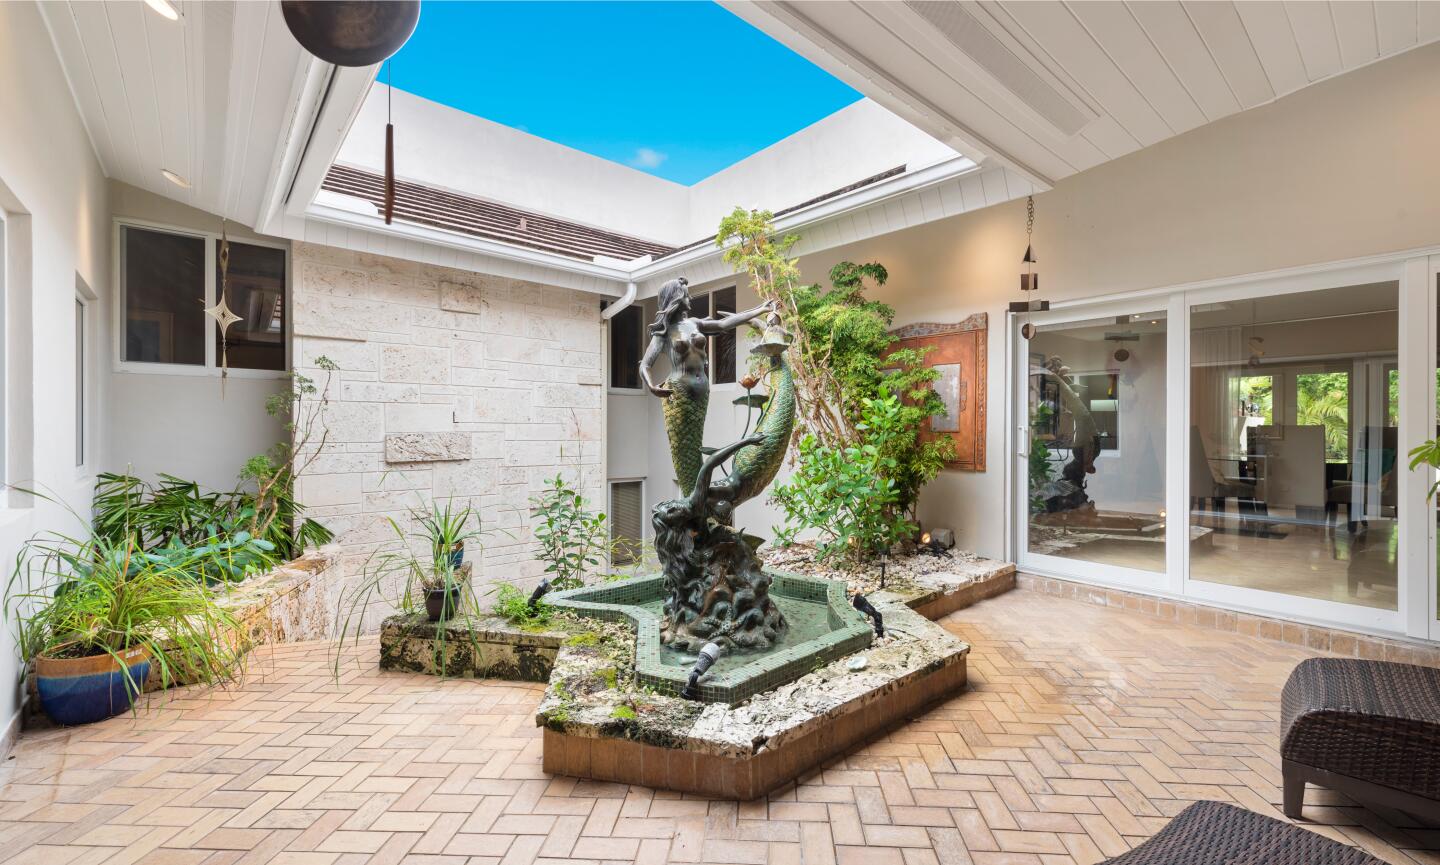 The split-level home wraps around a leafy courtyard anchored by a fountain and mermaid statue.